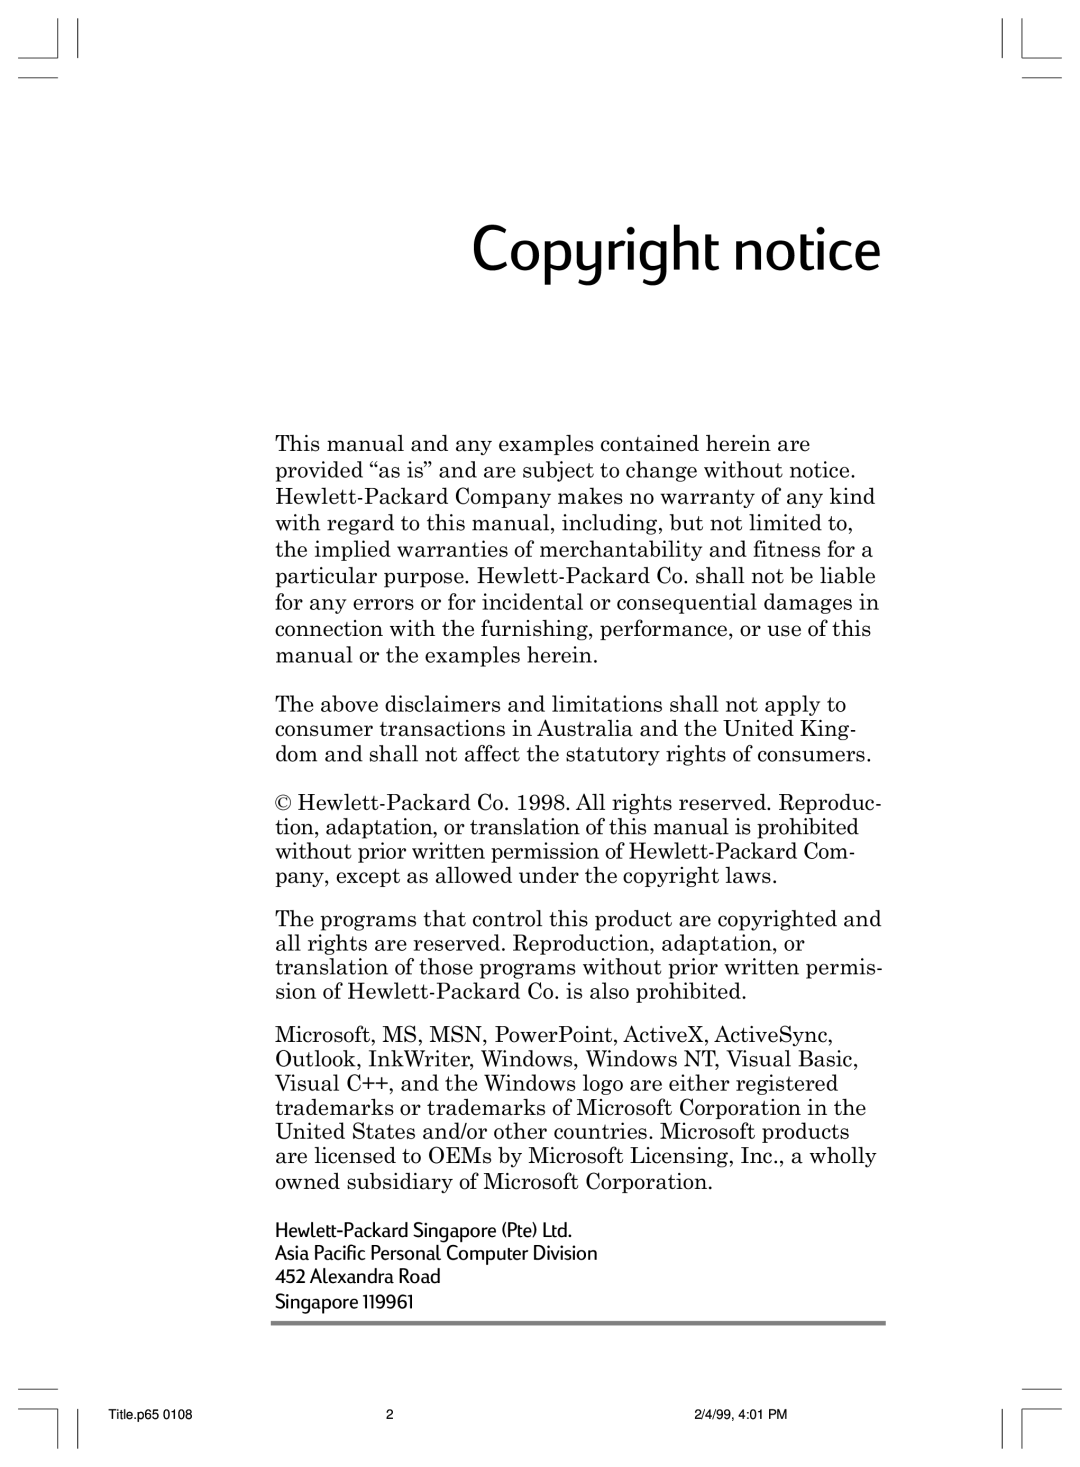 HP 820 E manual Copyright notice, Asia Pacific Personal Computer Division 452 Alexandra Road Singapore 